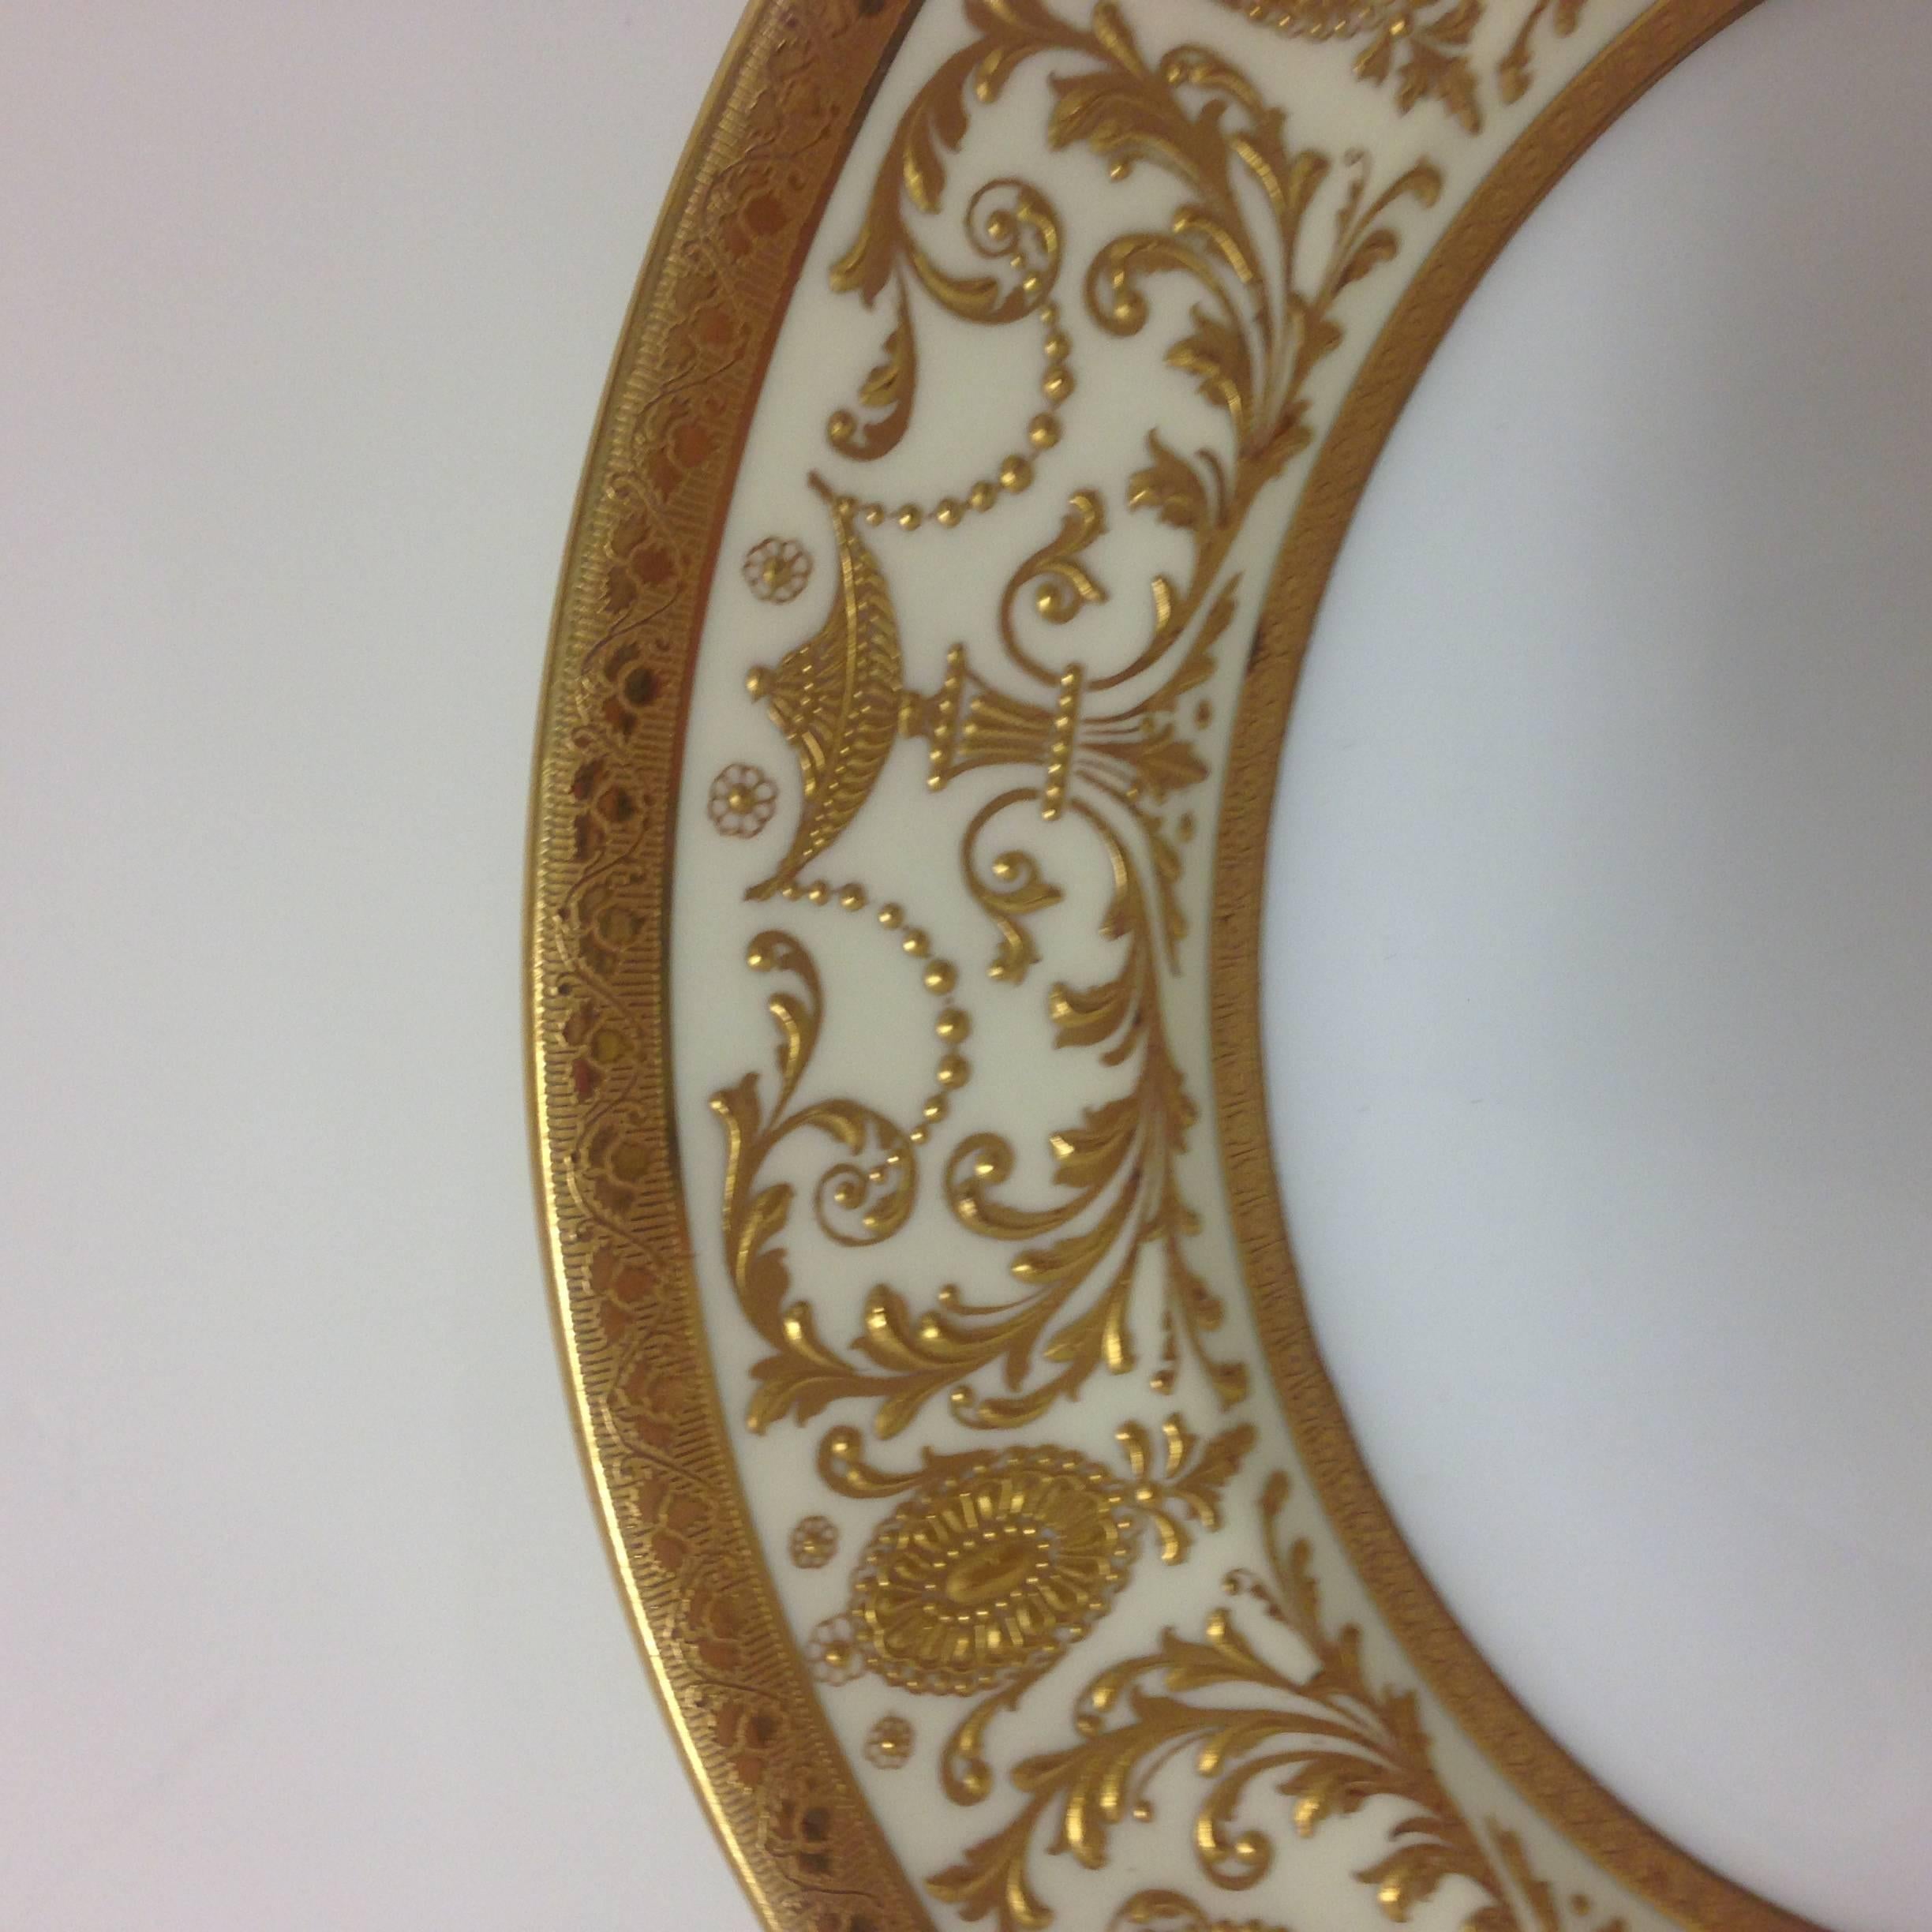 Absolutely stunning set of detailed and hand raised tooled gilding set of dinner or presentation plates. Acid etched gold banding and nice clear centers with a Classic hint of cream on the shoulders of the plates. Custom retailer hall mark with